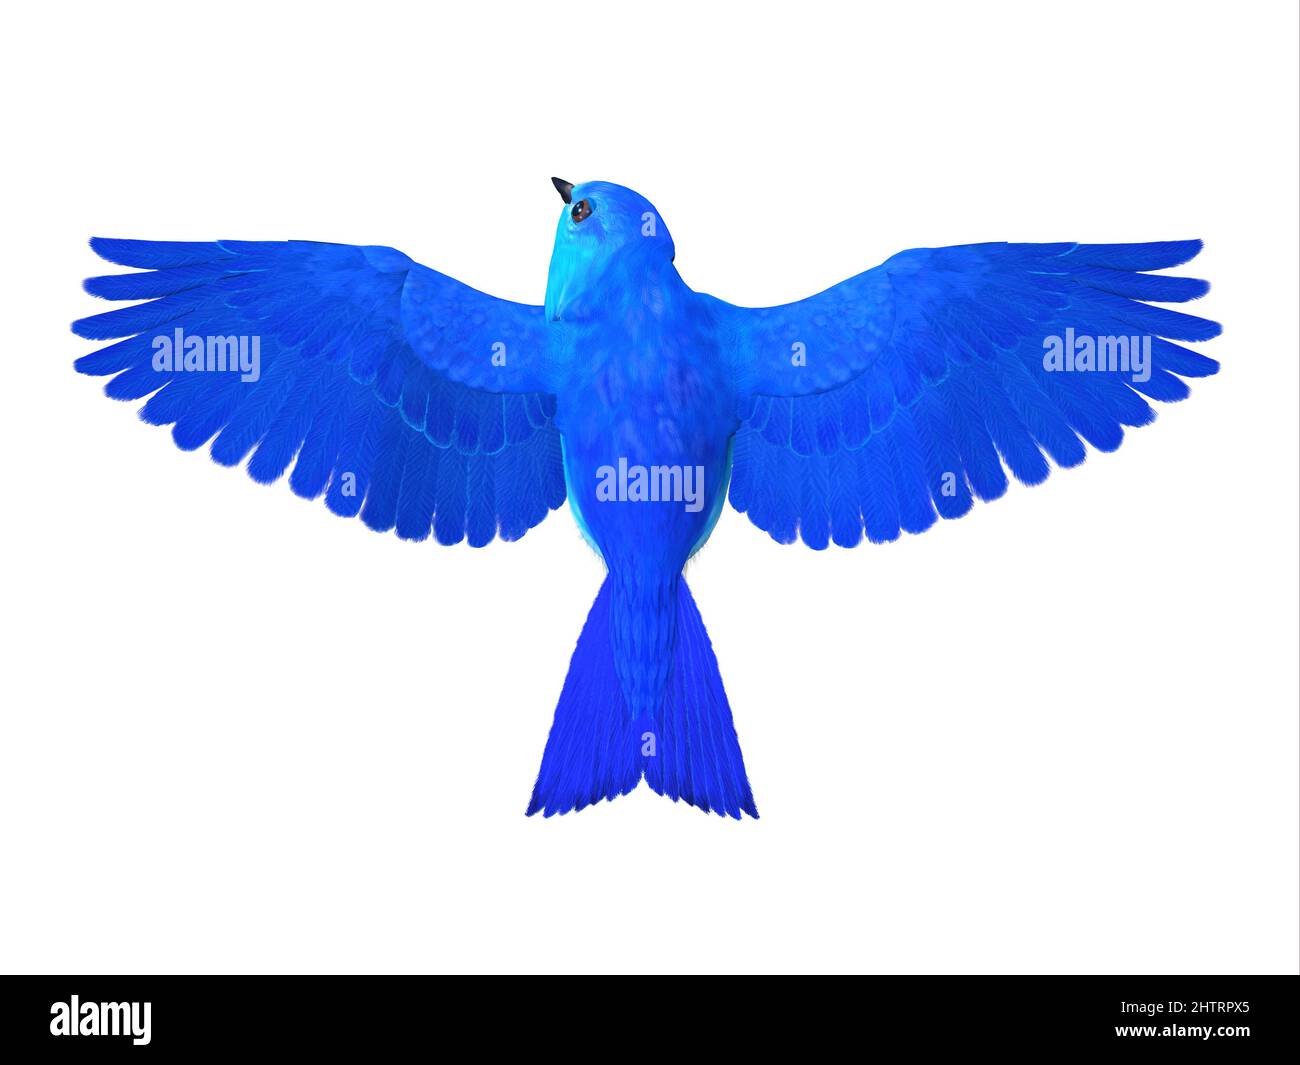 The Bluebird of Happiness is a symbol of joy and looking forward to better times in the future. Stock Photo